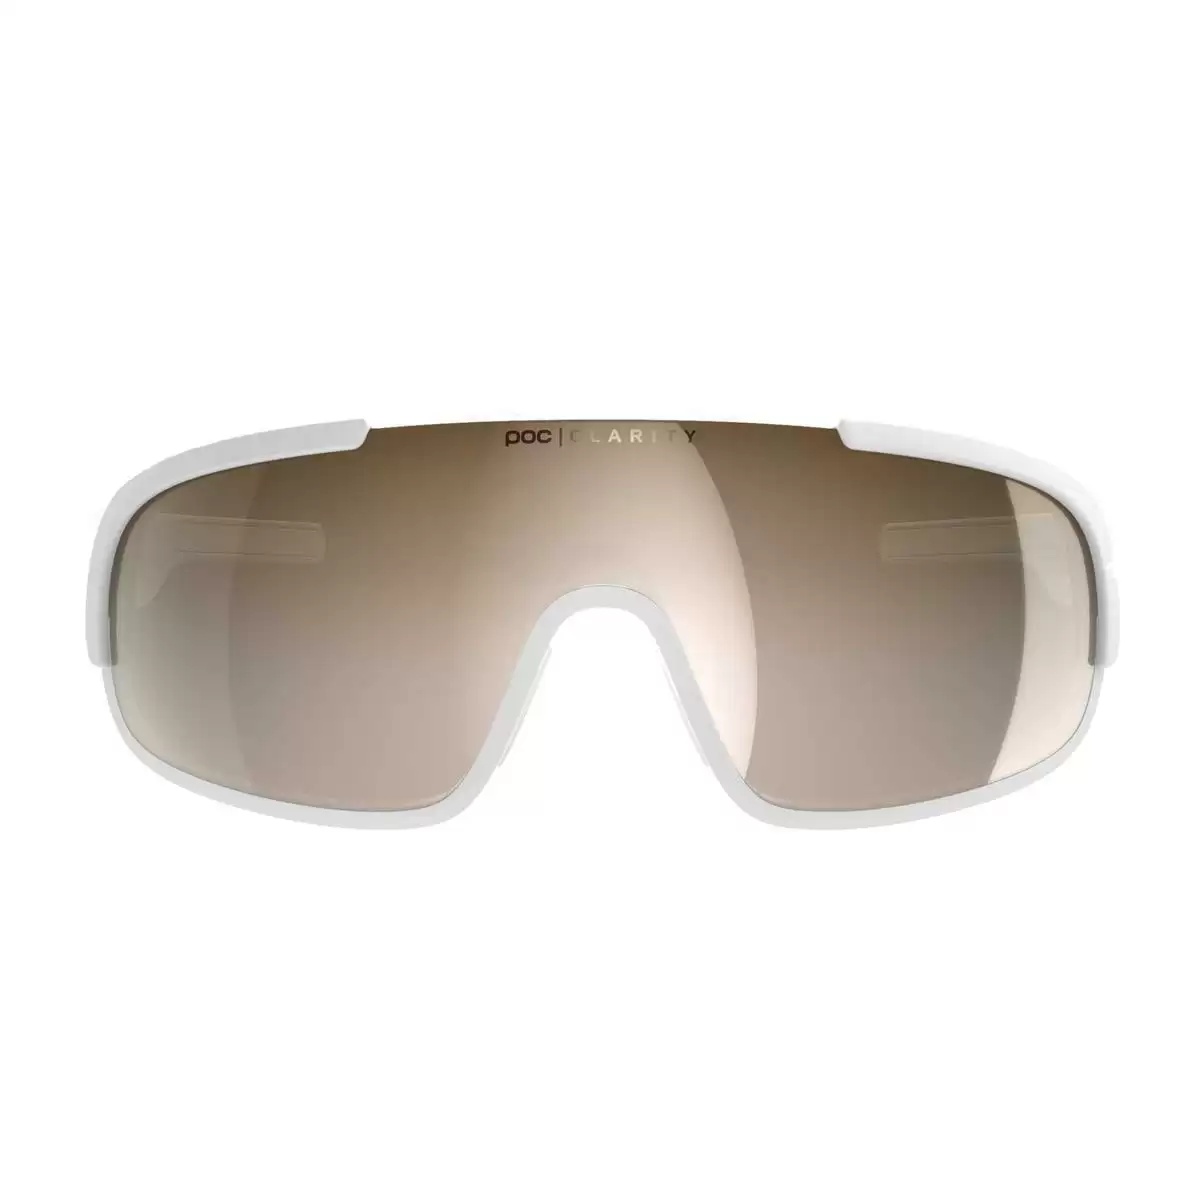 Crave sunglasses white clarity lens Brown #3